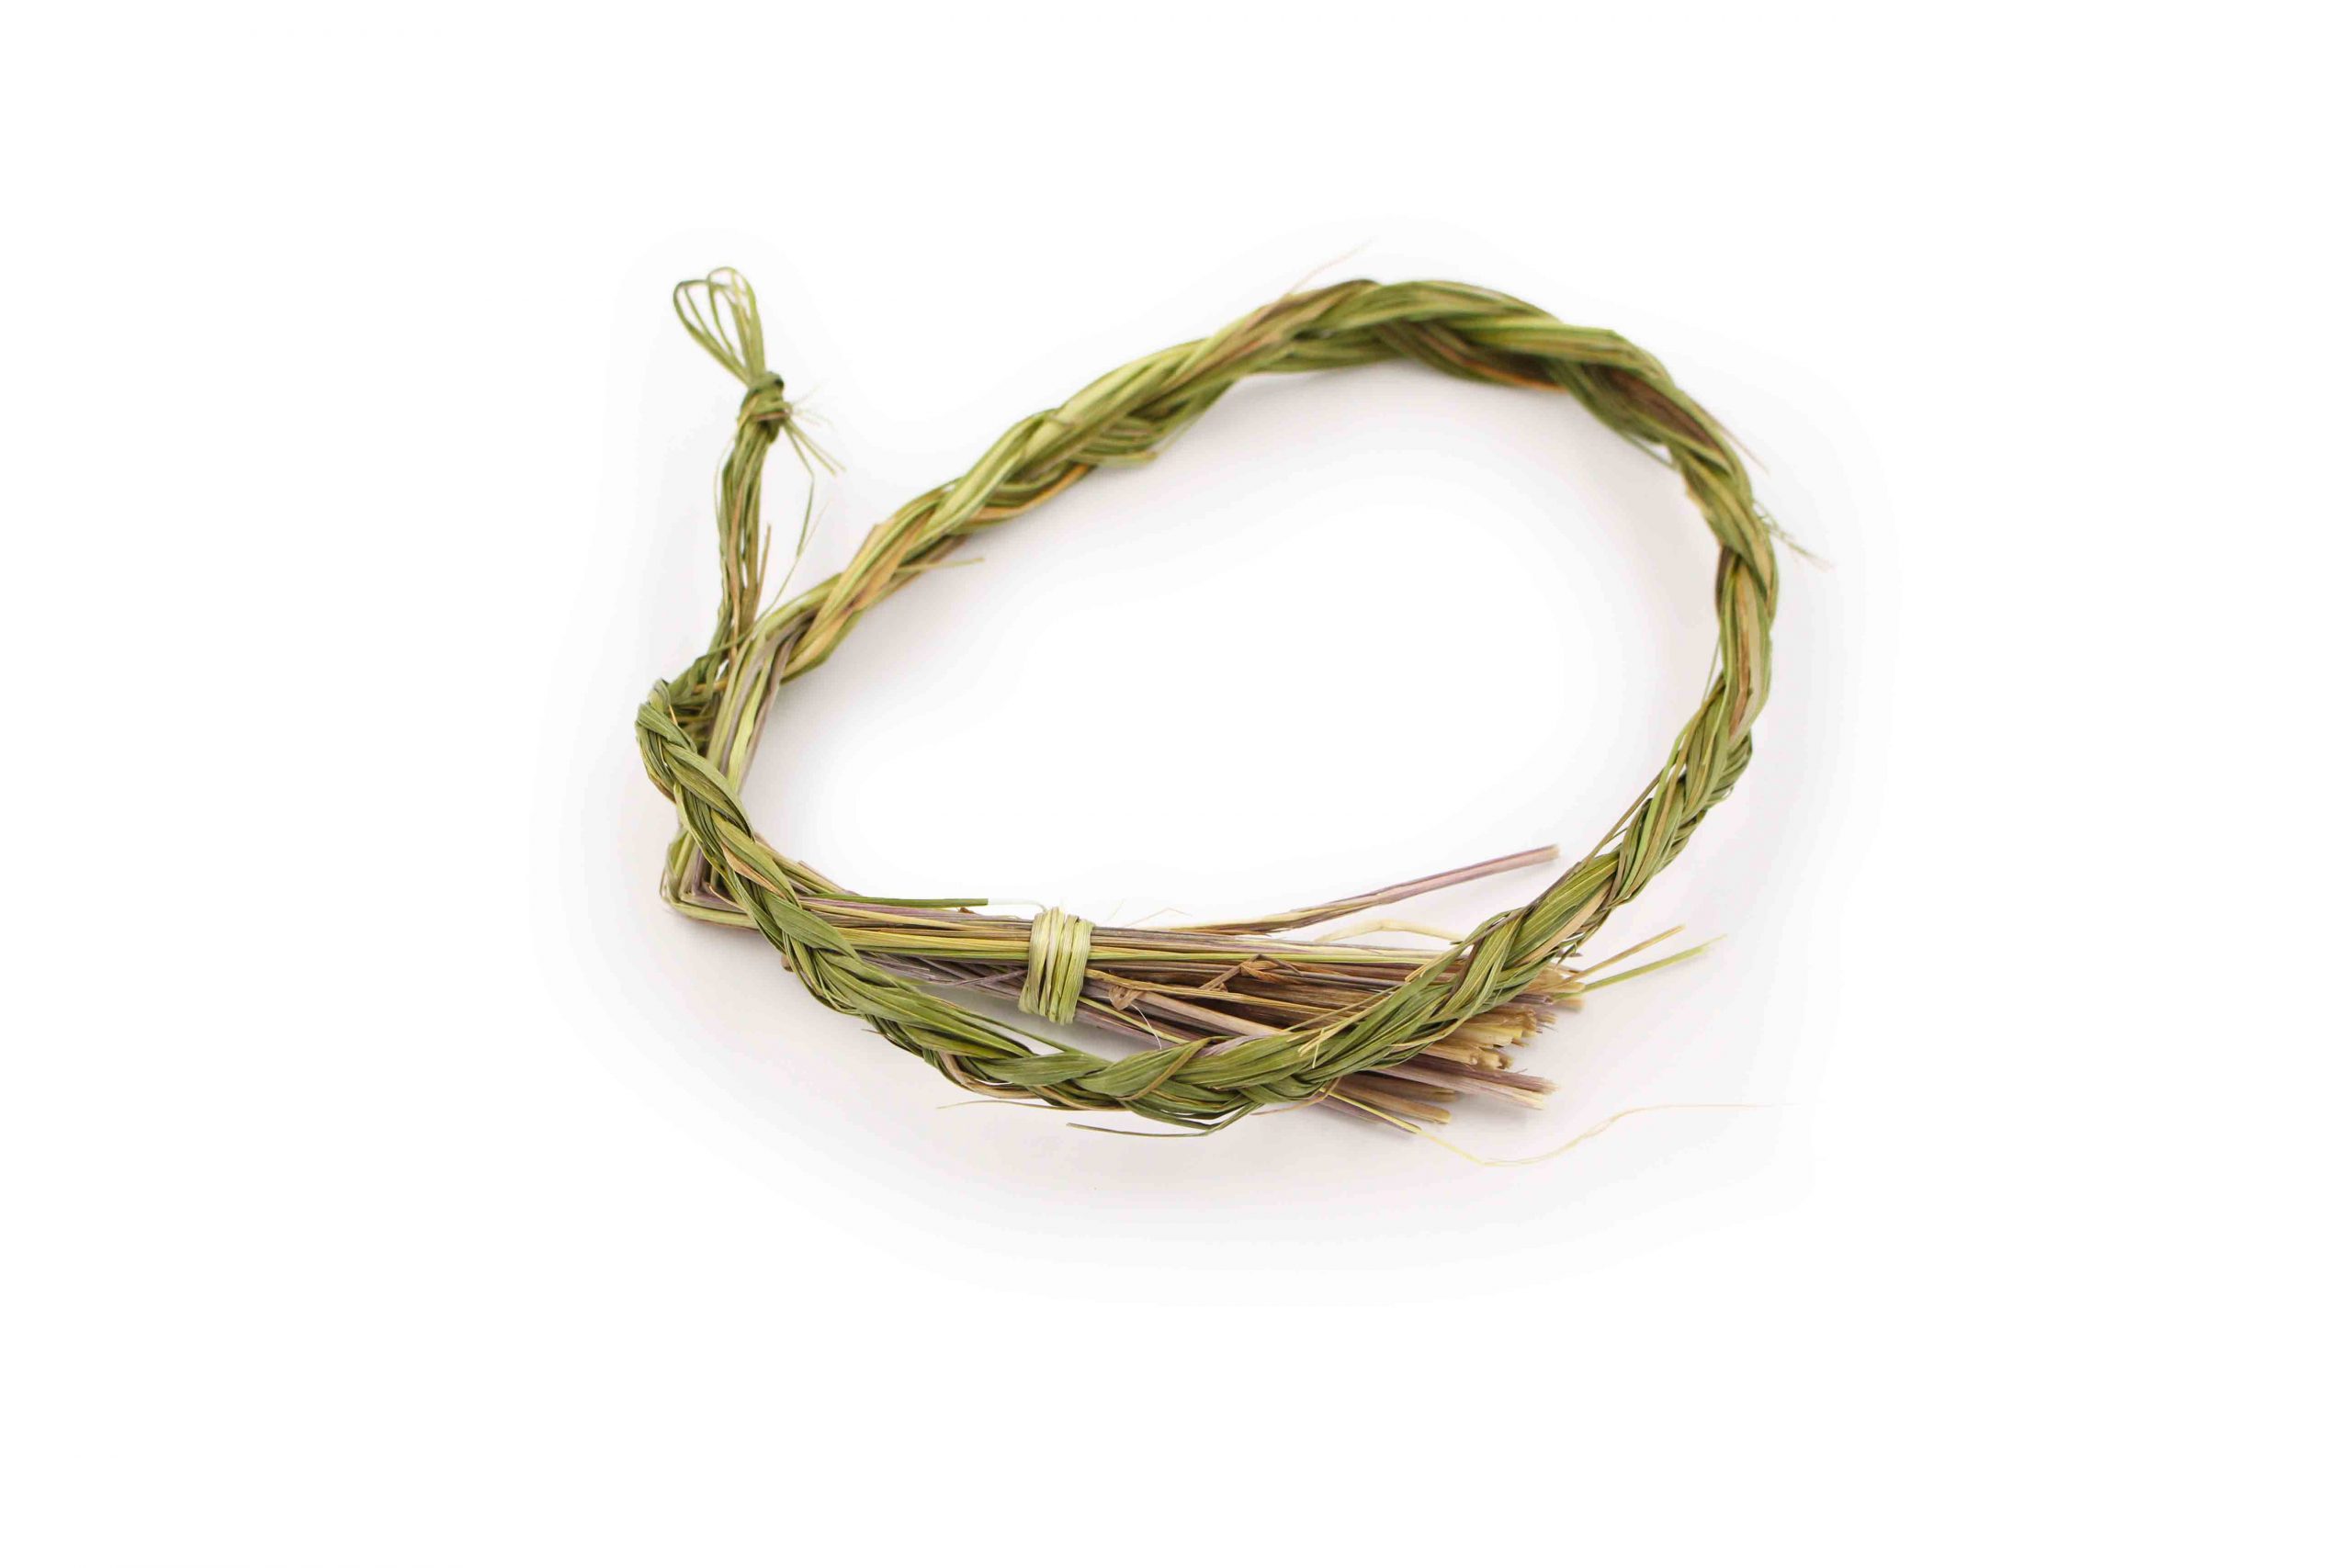 Sweetgrass Smudging Herb - Crystal Dreams